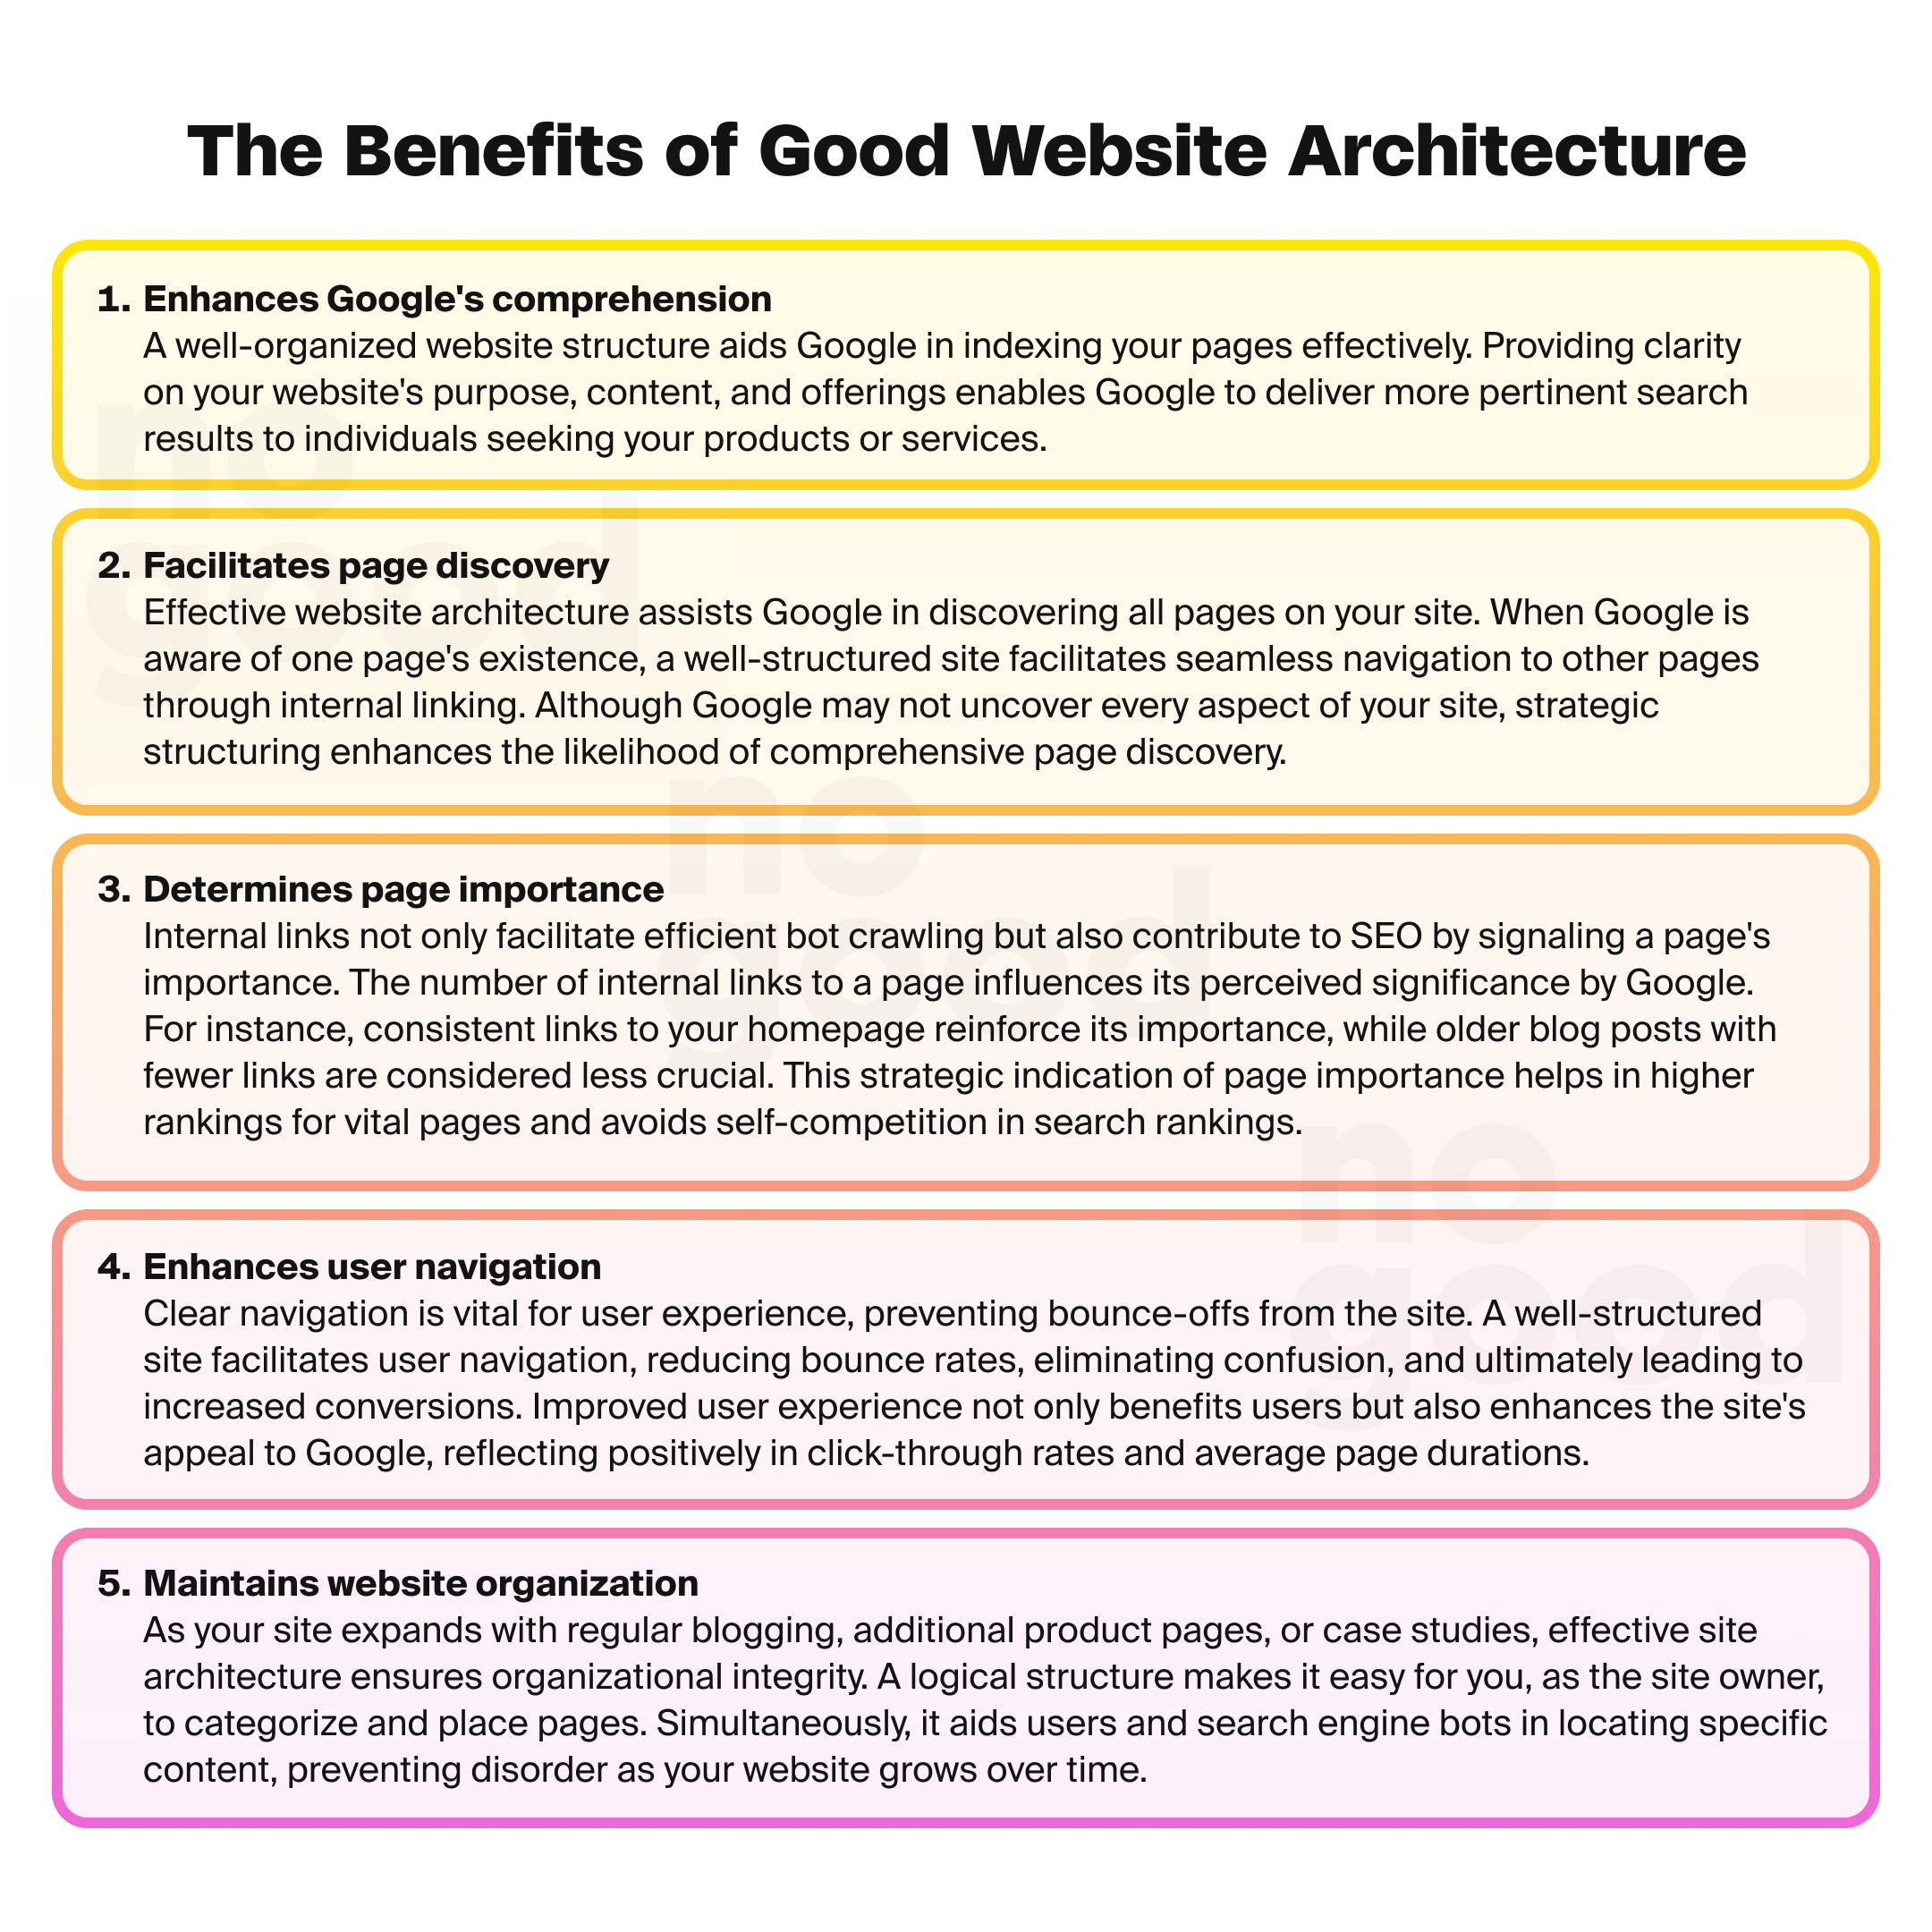 The benefits of good website architecture